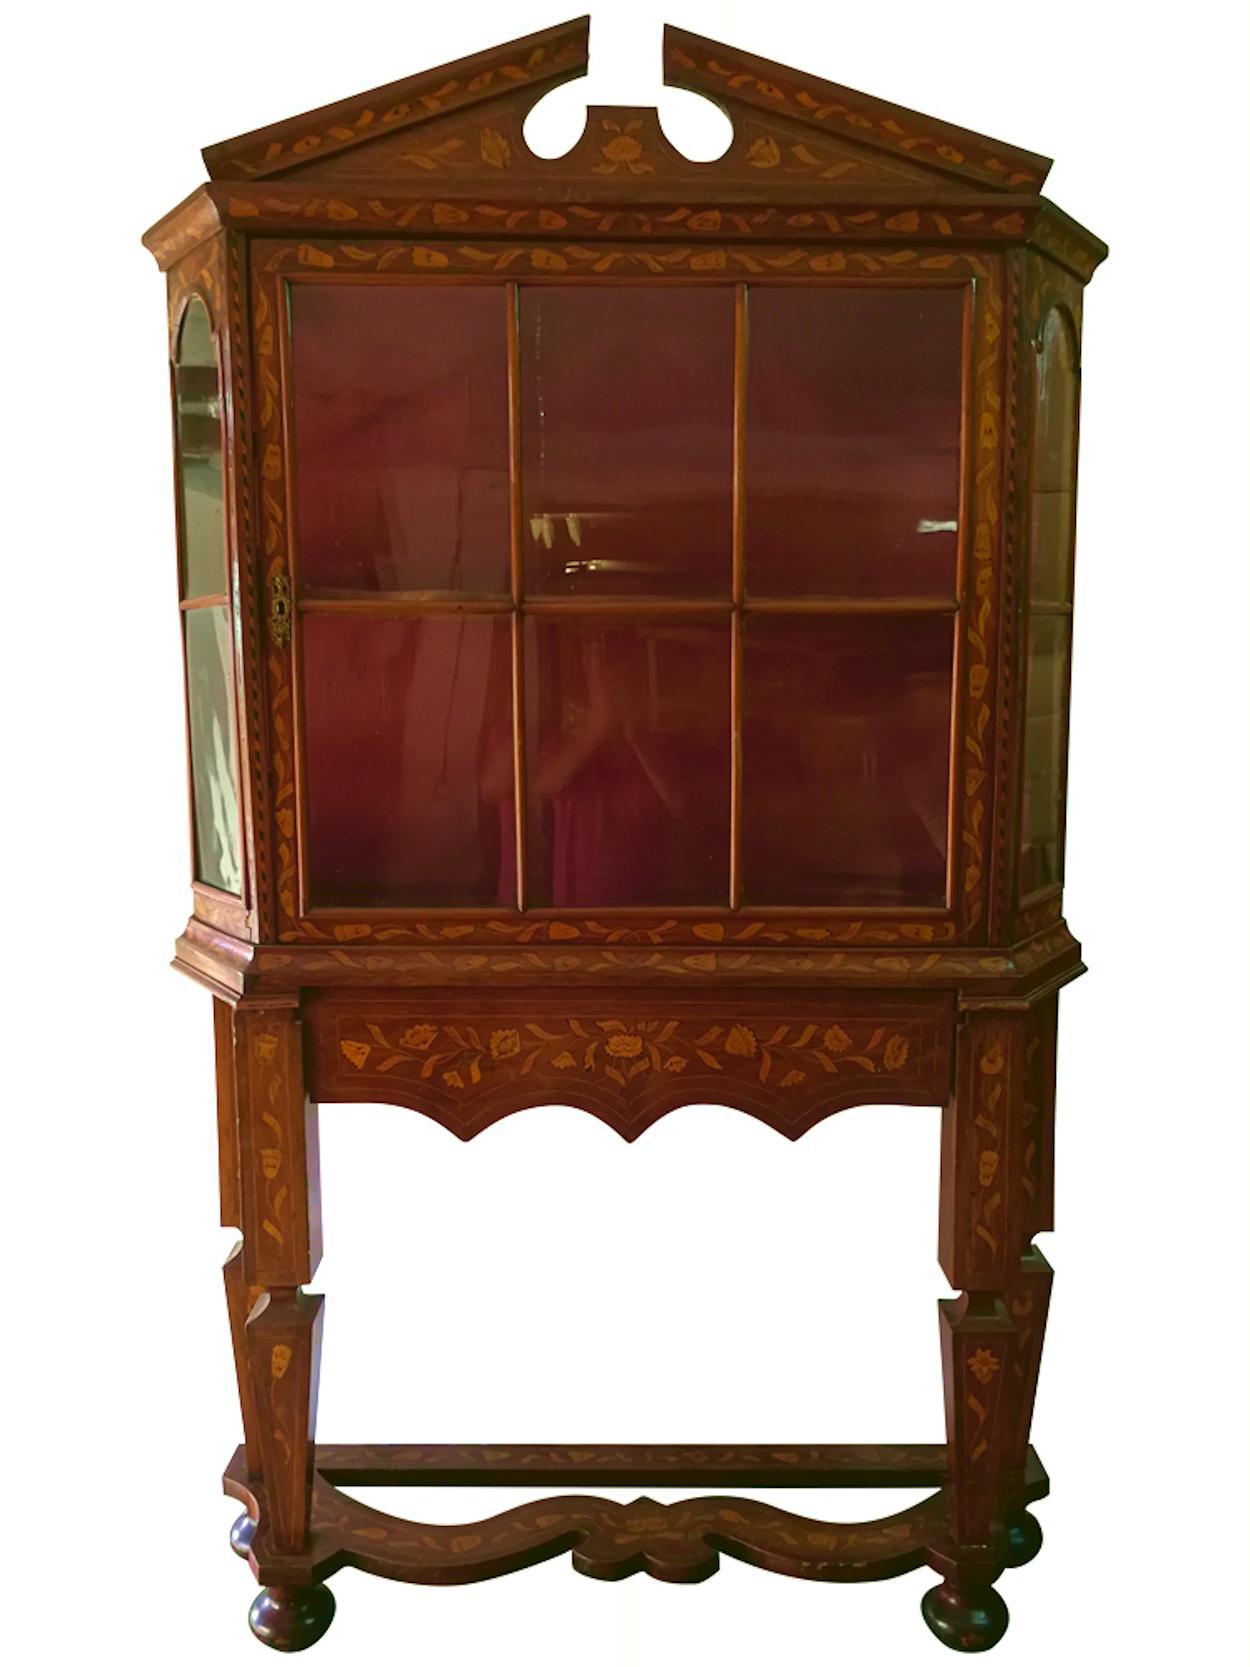 Dutch wall display cabinet in marquetry of 18th century in mahogany and boxwood and with boxwood and mahogany marquetry floral decorations, with columns on its legs that resemble pilasters and with a central drawer. As a curiosity, only one of the